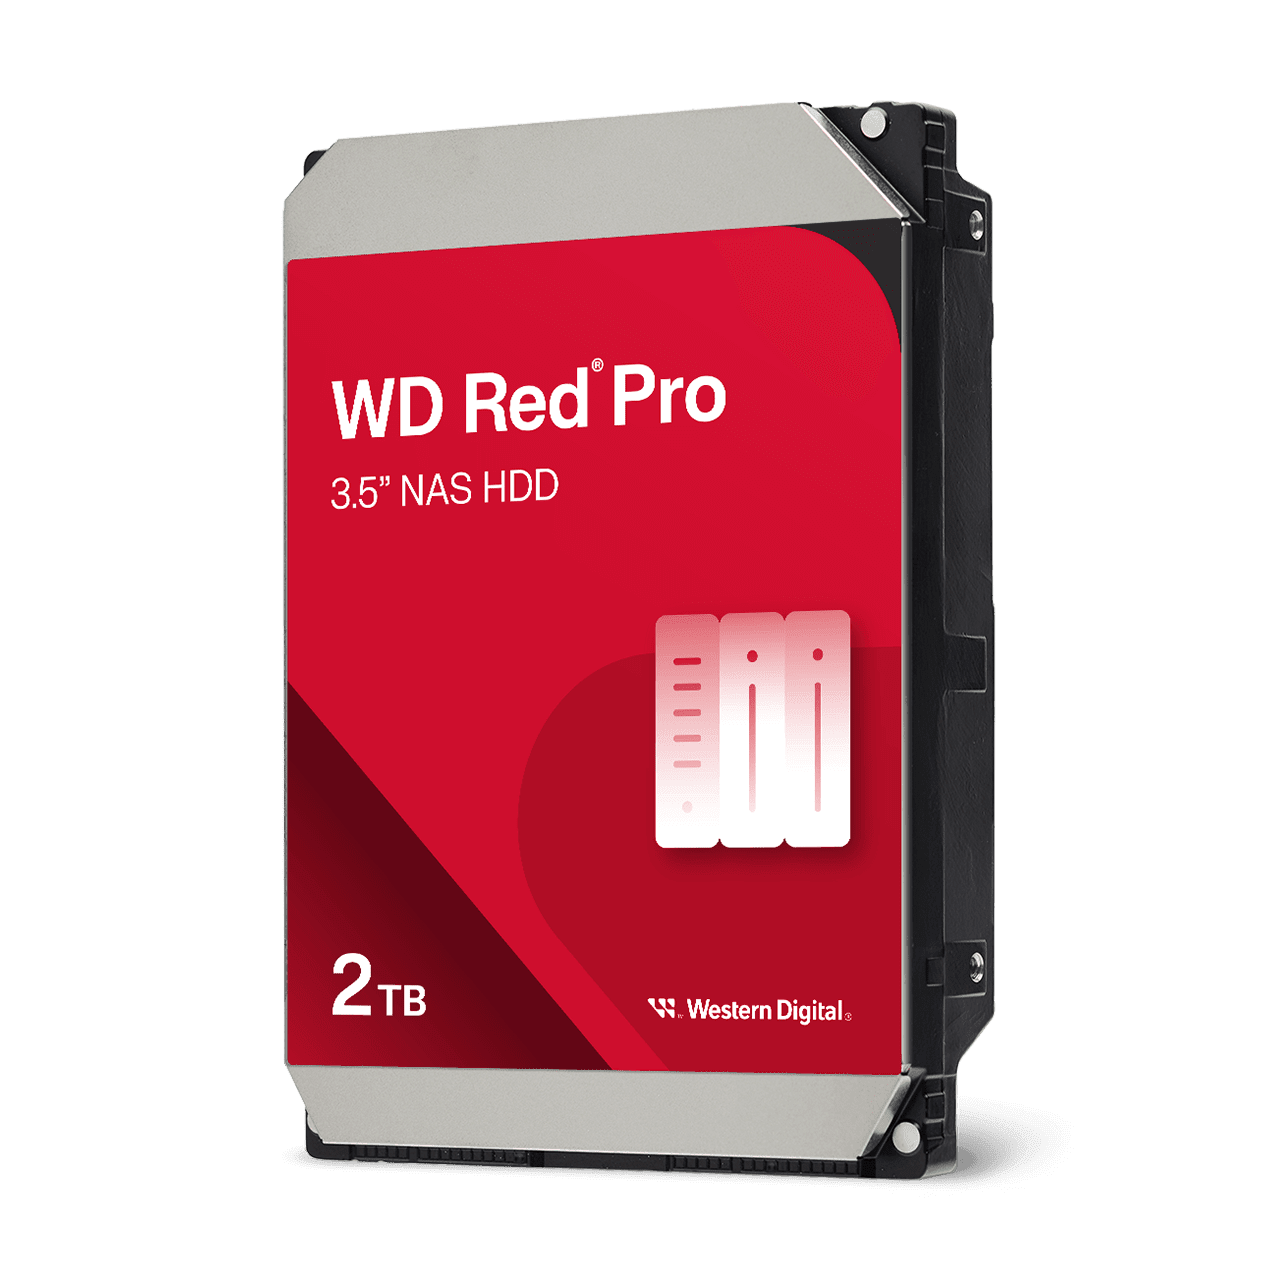 WD Red™ Pro 2TB NAS Hard Drive - Image1